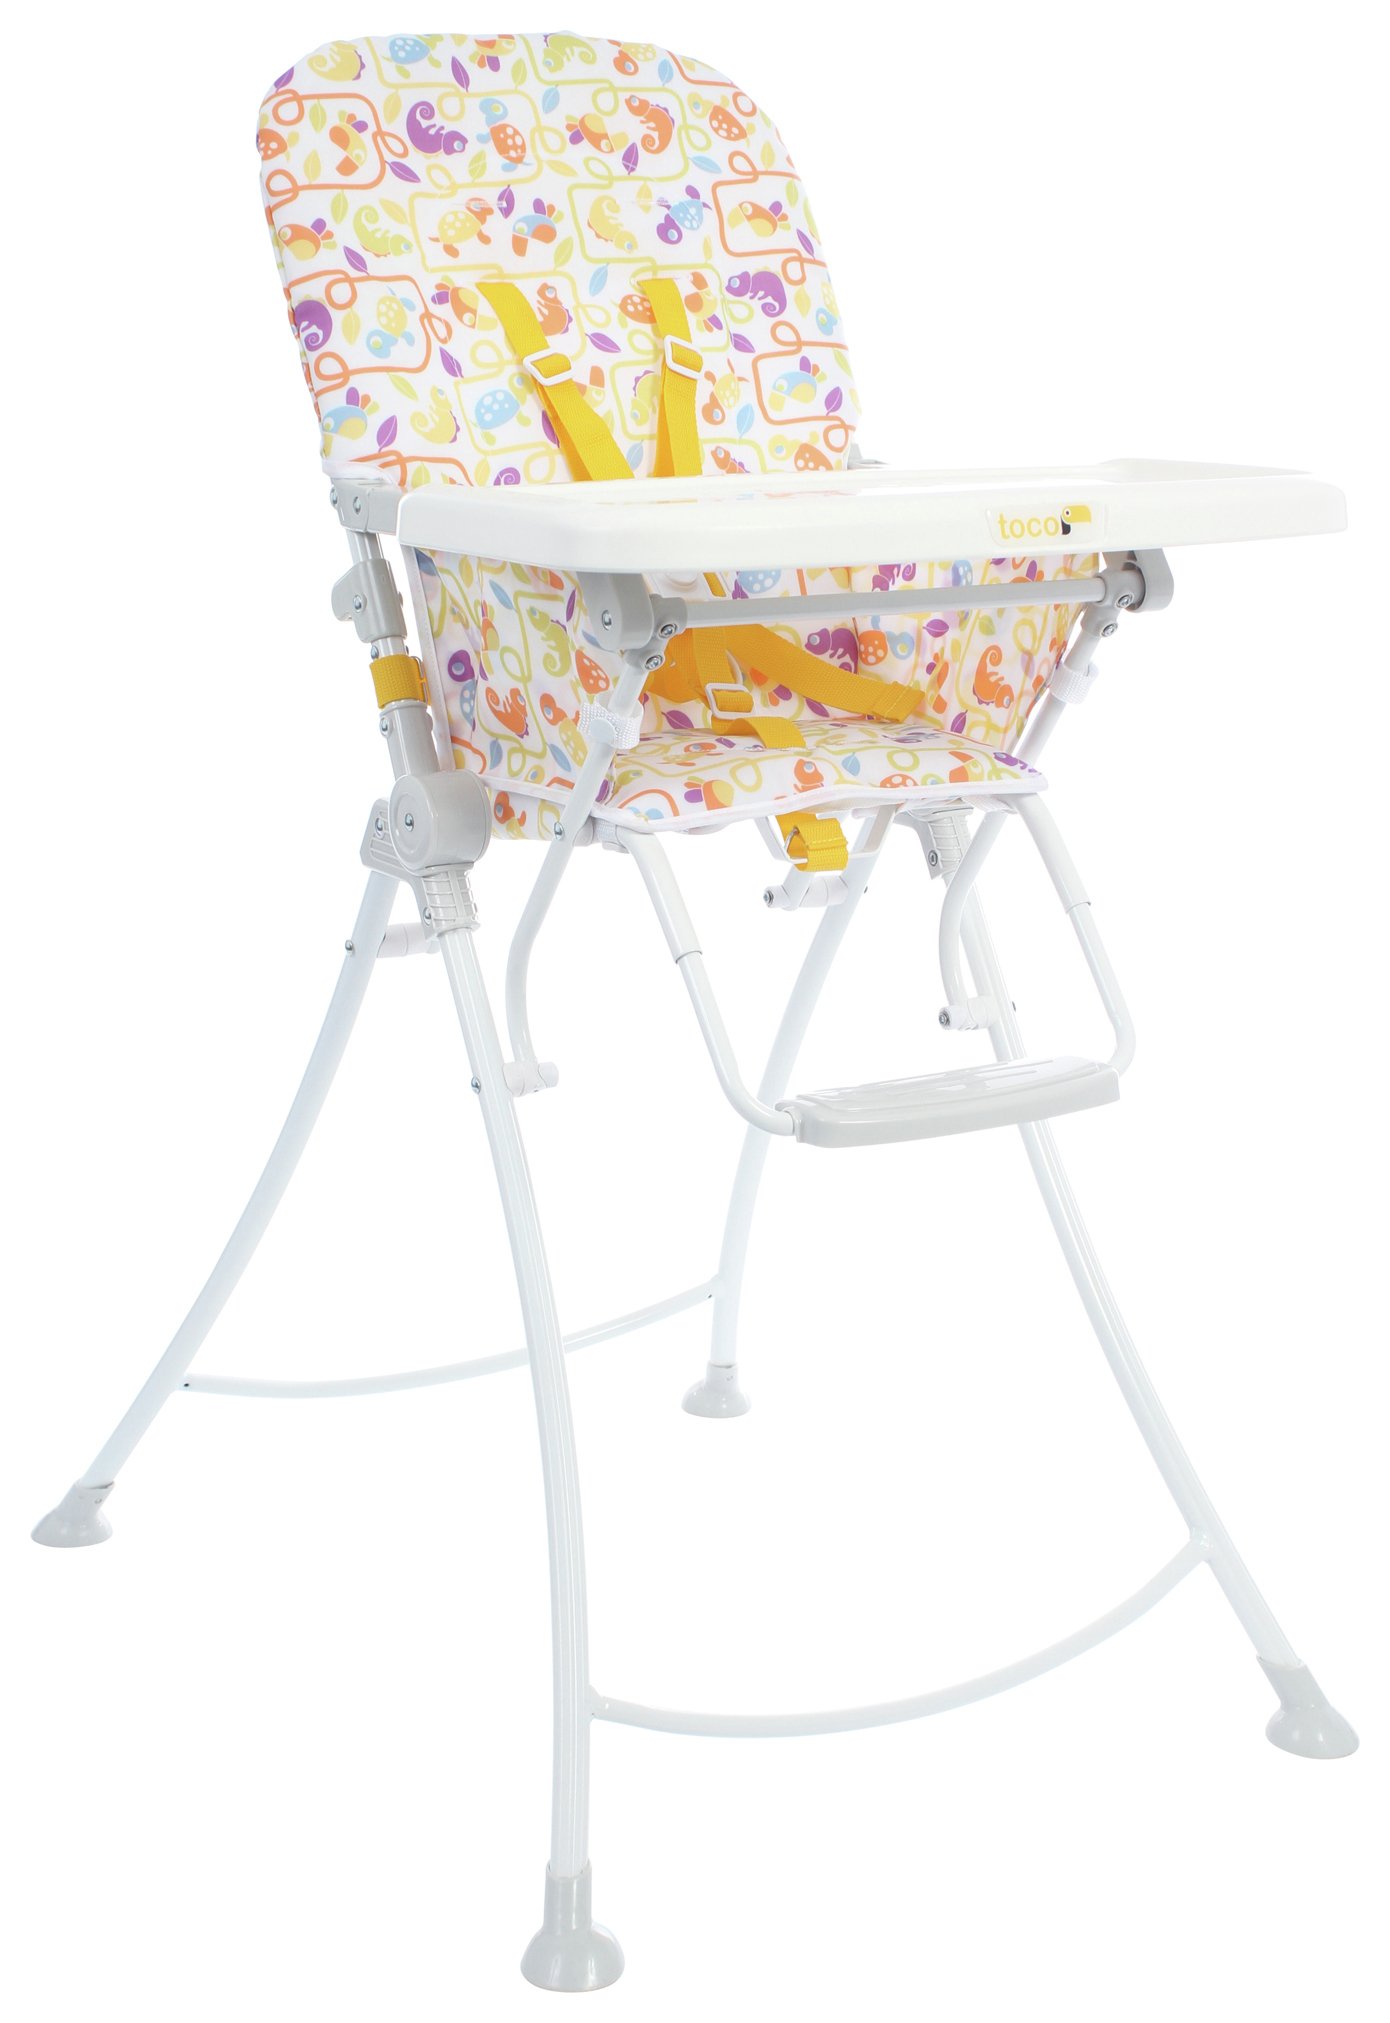 Toco Galley Compact Folding Highchair.